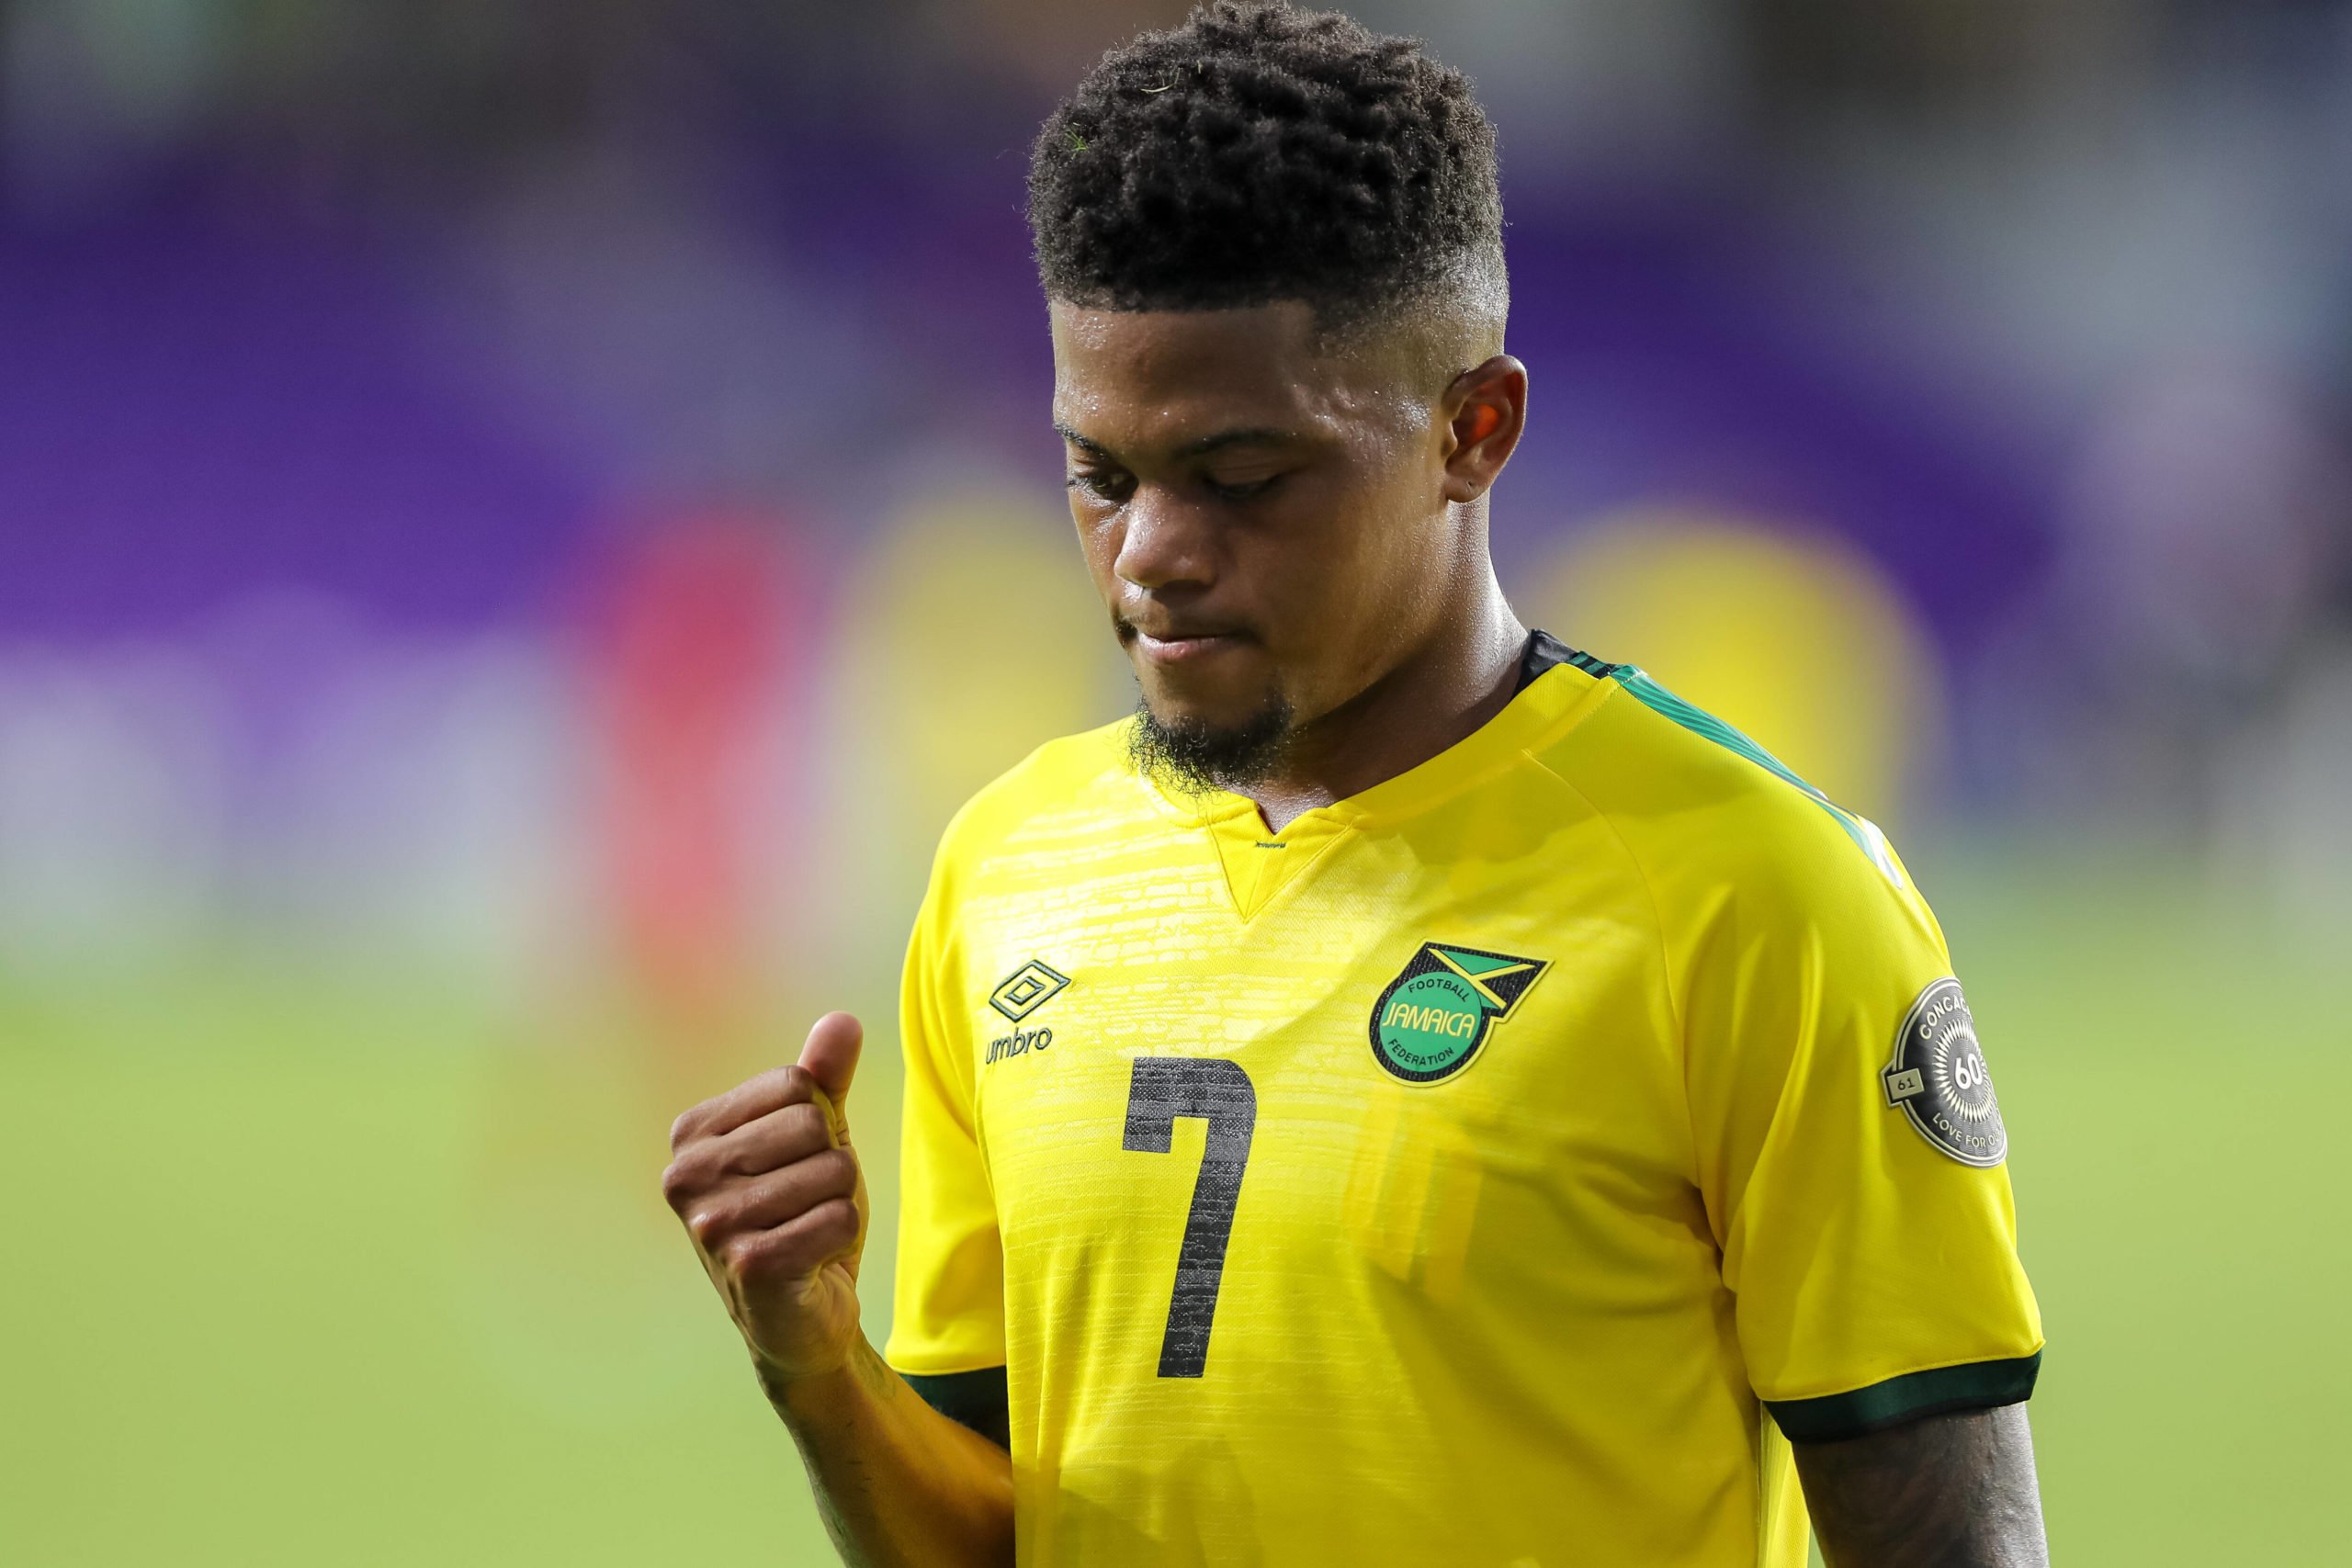 Aston Villa confirm the capture of Leon Bailey who is seen in the picture